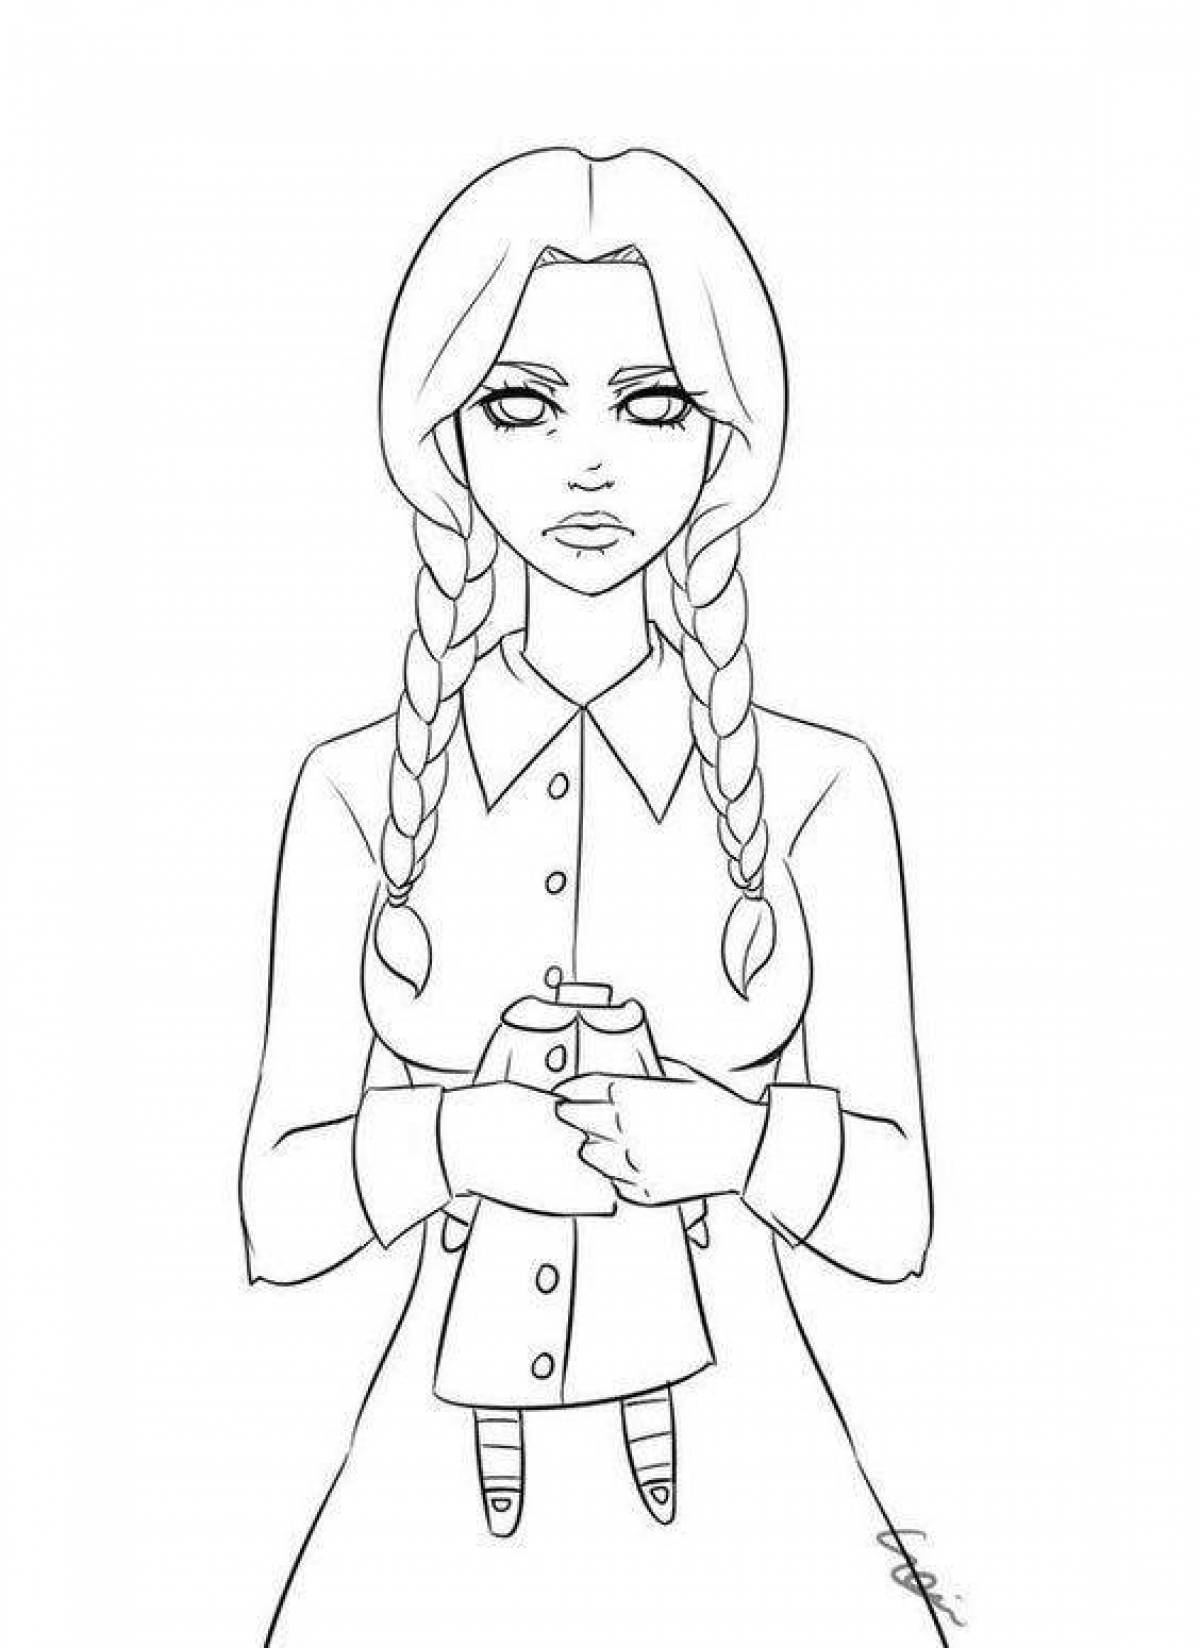 Wednesday girlfriend's animated coloring page